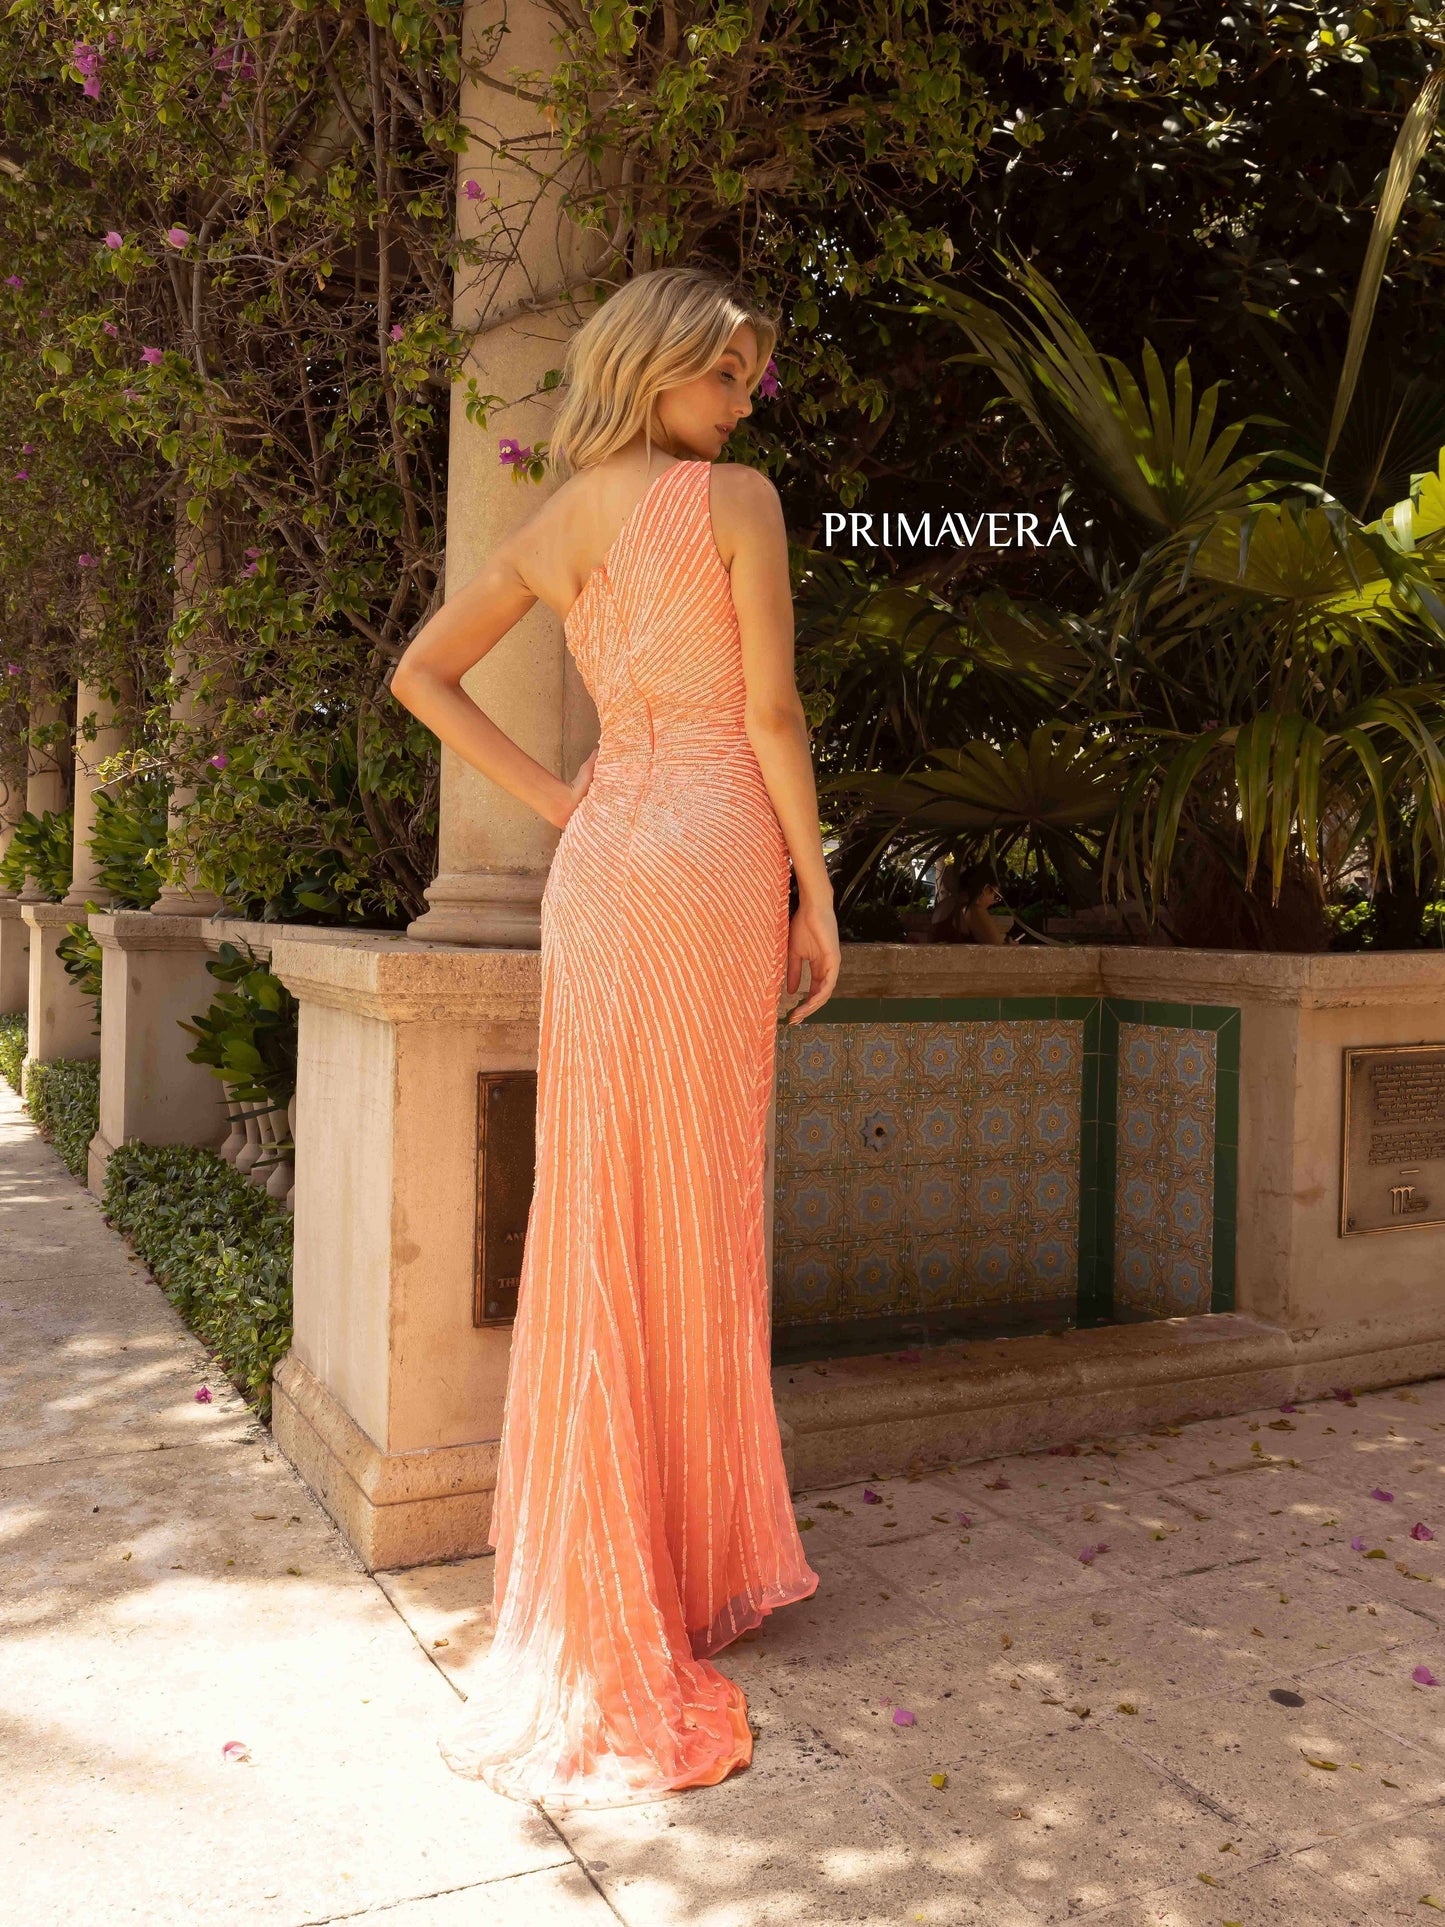 Primavera Couture 3932 Long Fitted One Shoulder Prom Dress Slit Beaded Sequin Gown with sweeping train.  Sizes: 000-24  Colors: Coral, Nude/Gold, Black, Red